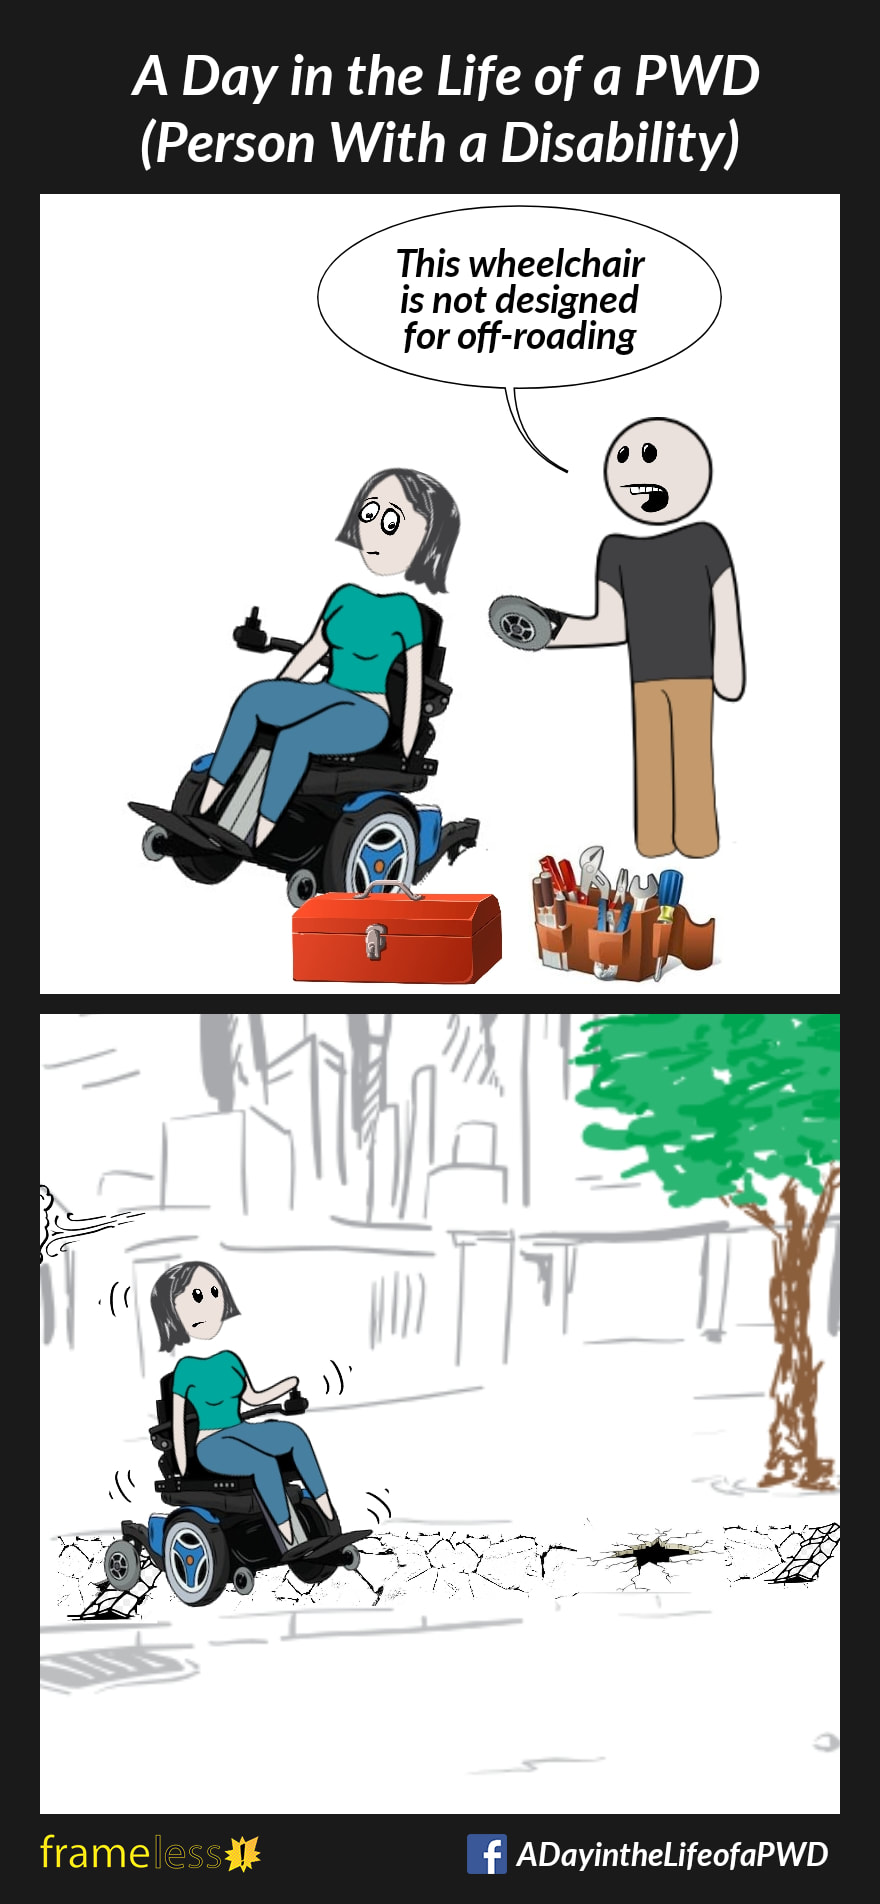 COMIC STRIP 
A Day in the Life of a PWD (Person With a Disability) 

Frame 1:
A woman is having the rear wheel on the power wheelchair repaired by a technician. 
TECHNICIAN: This wheelchair is not designed for off-roading

Frame 2:
Later, the woman is traveling down a sidewalk. The sidewalk is in poor condition, with cracks, holes, and broken sections. 